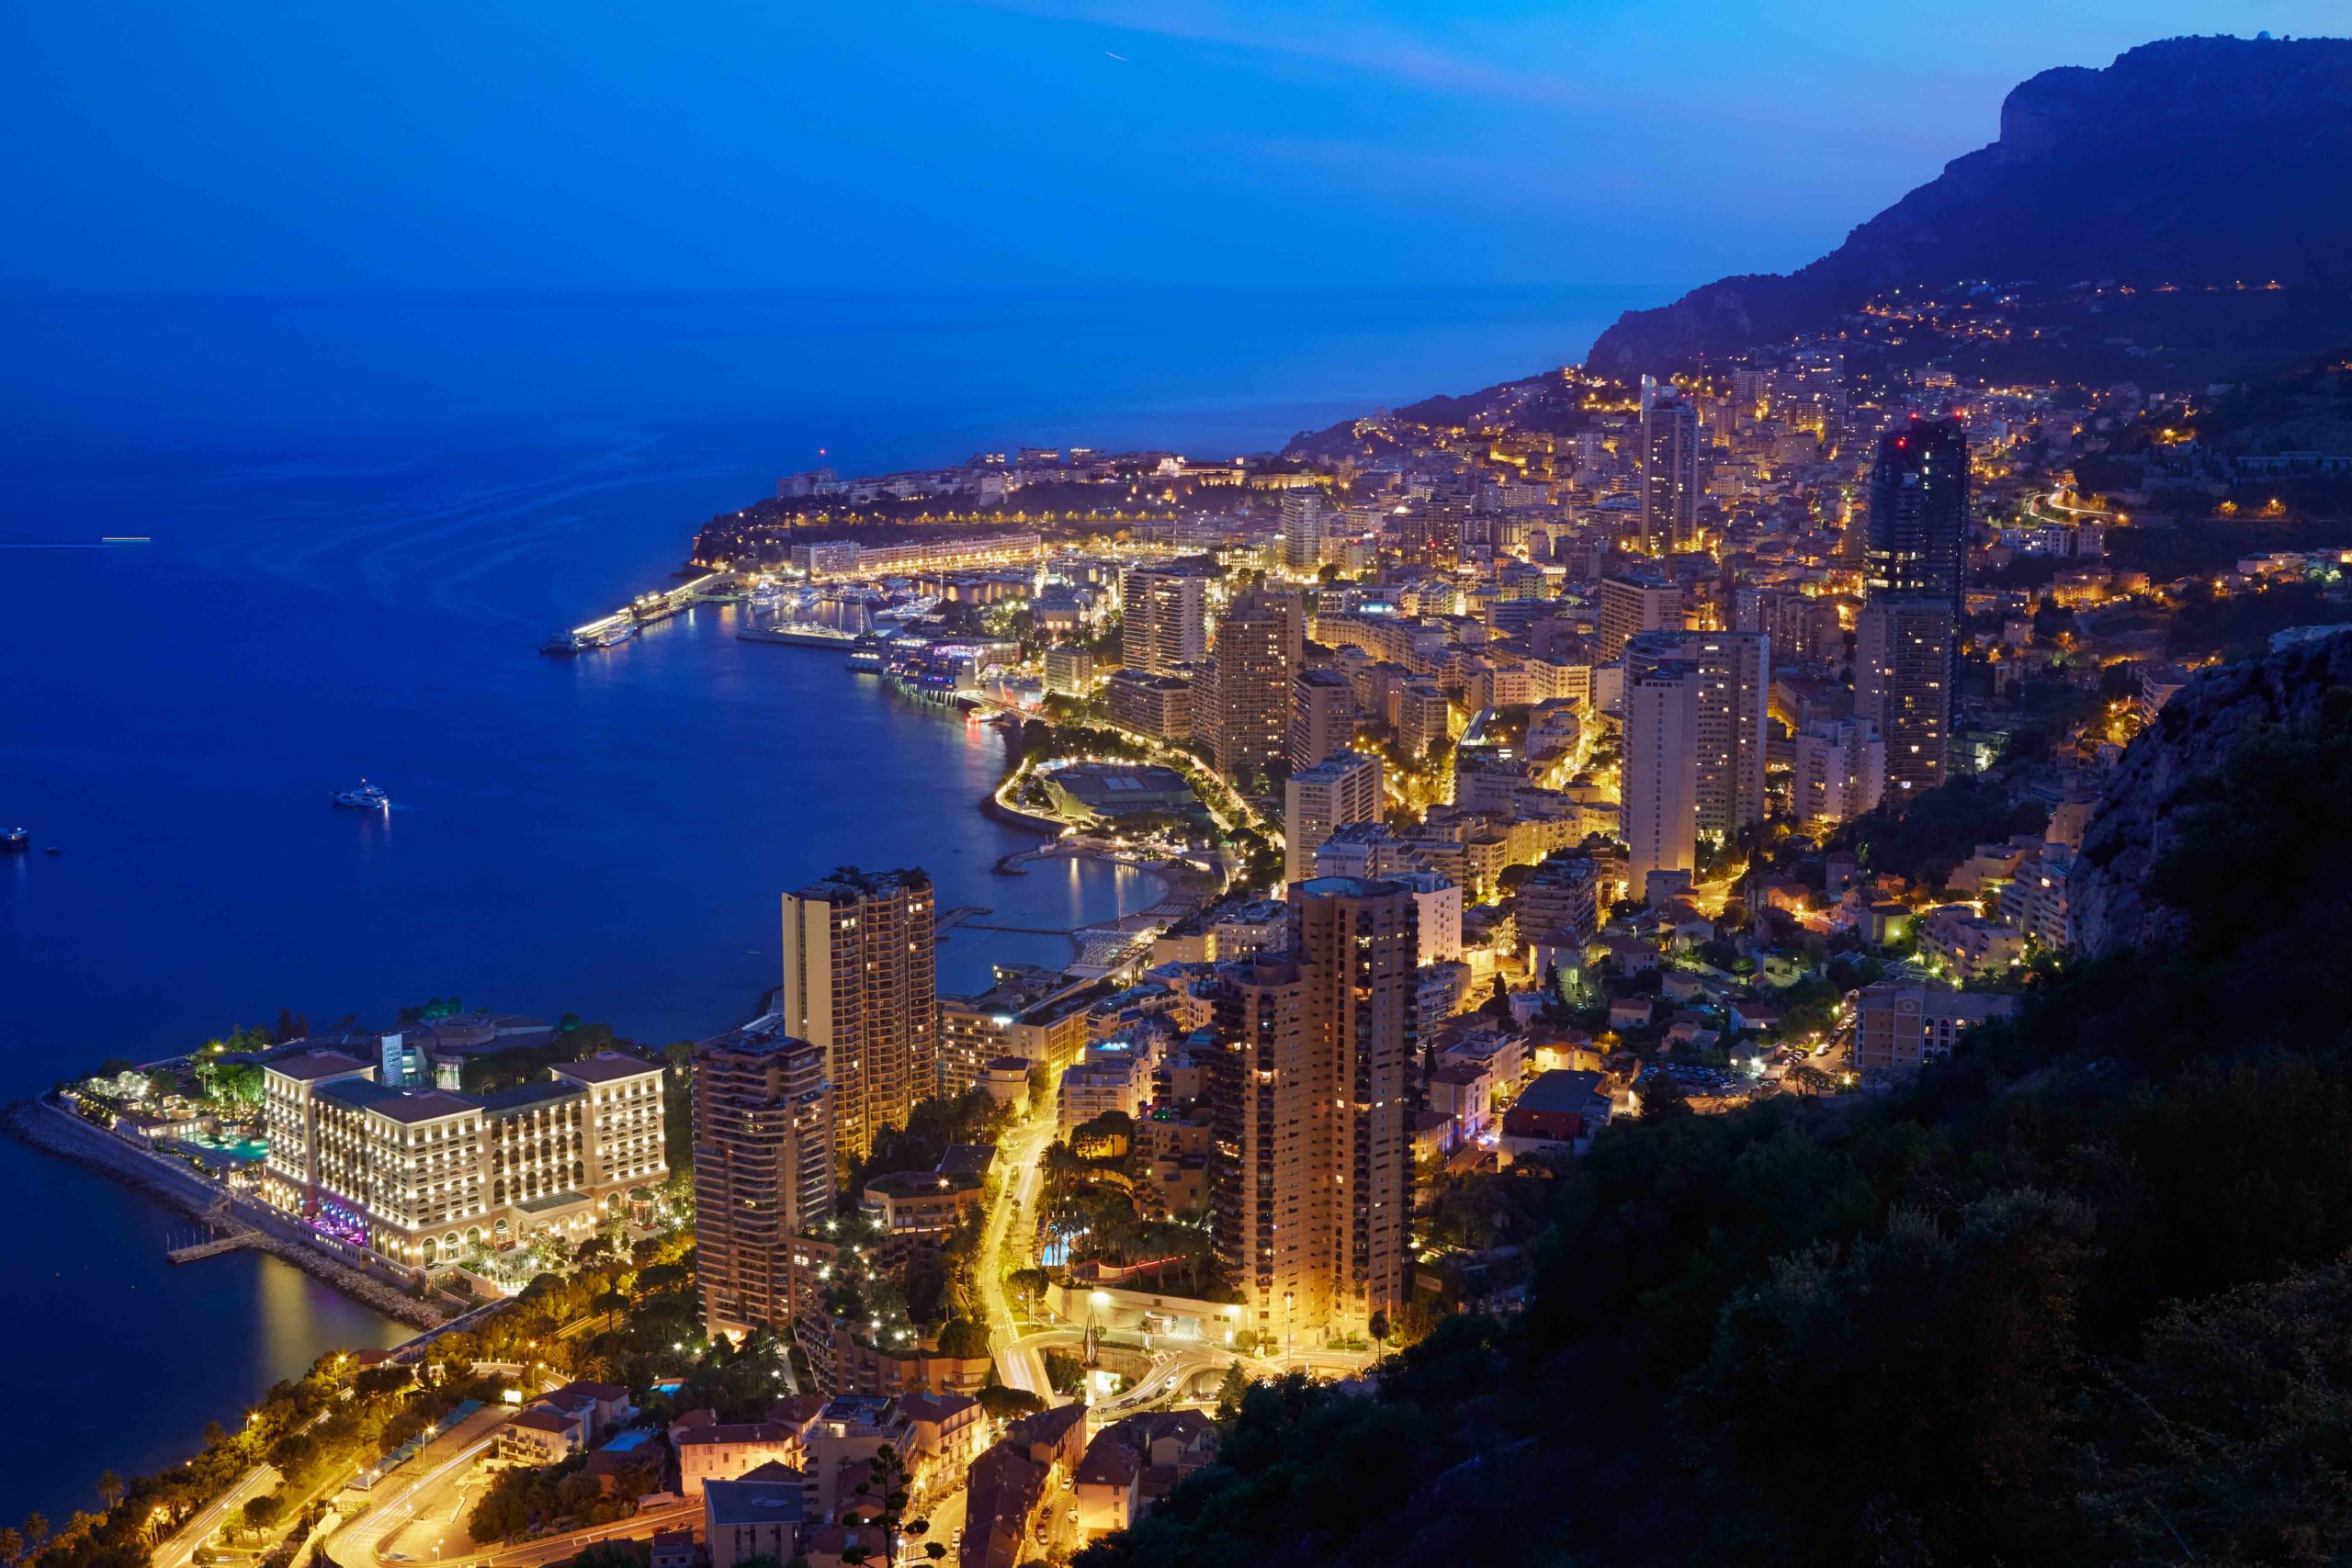 The Principality of Monaco at night time. Photo: andreahast via Envato Elements